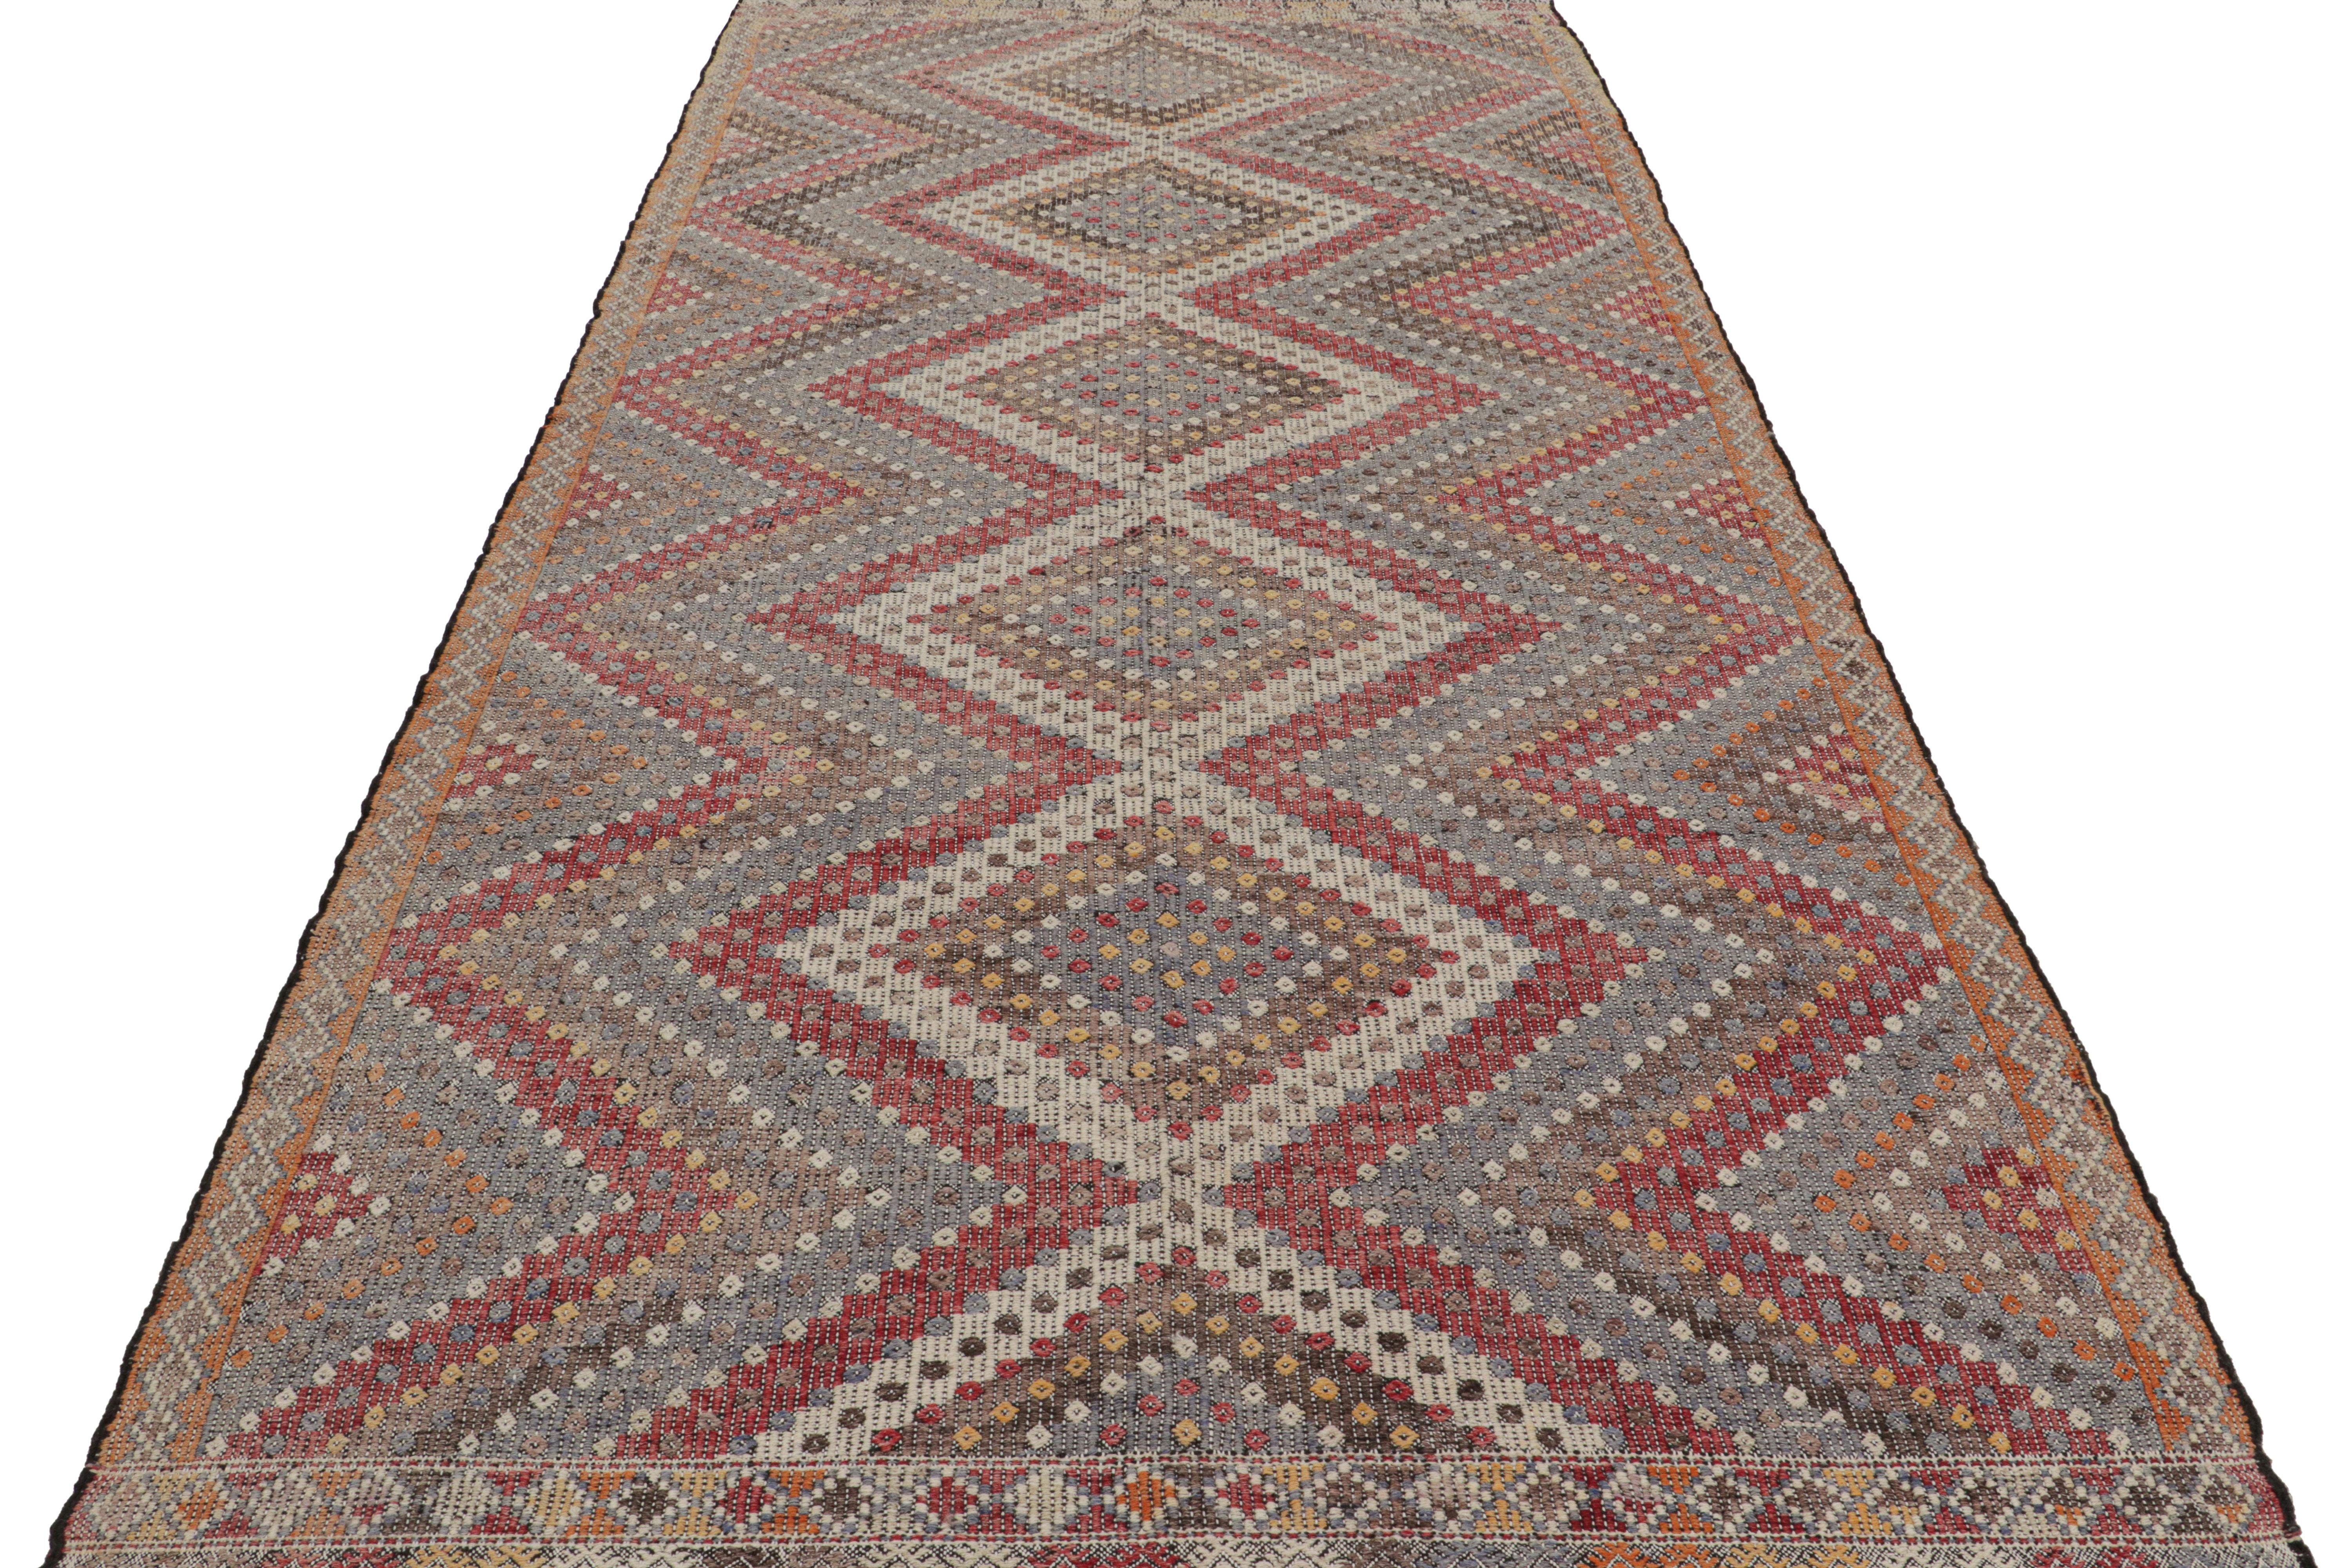 Vintage Midcentury Geometric Beige-Brown Red, Blue Wool Kilim Rug by Rug & Kilim In Good Condition For Sale In Long Island City, NY